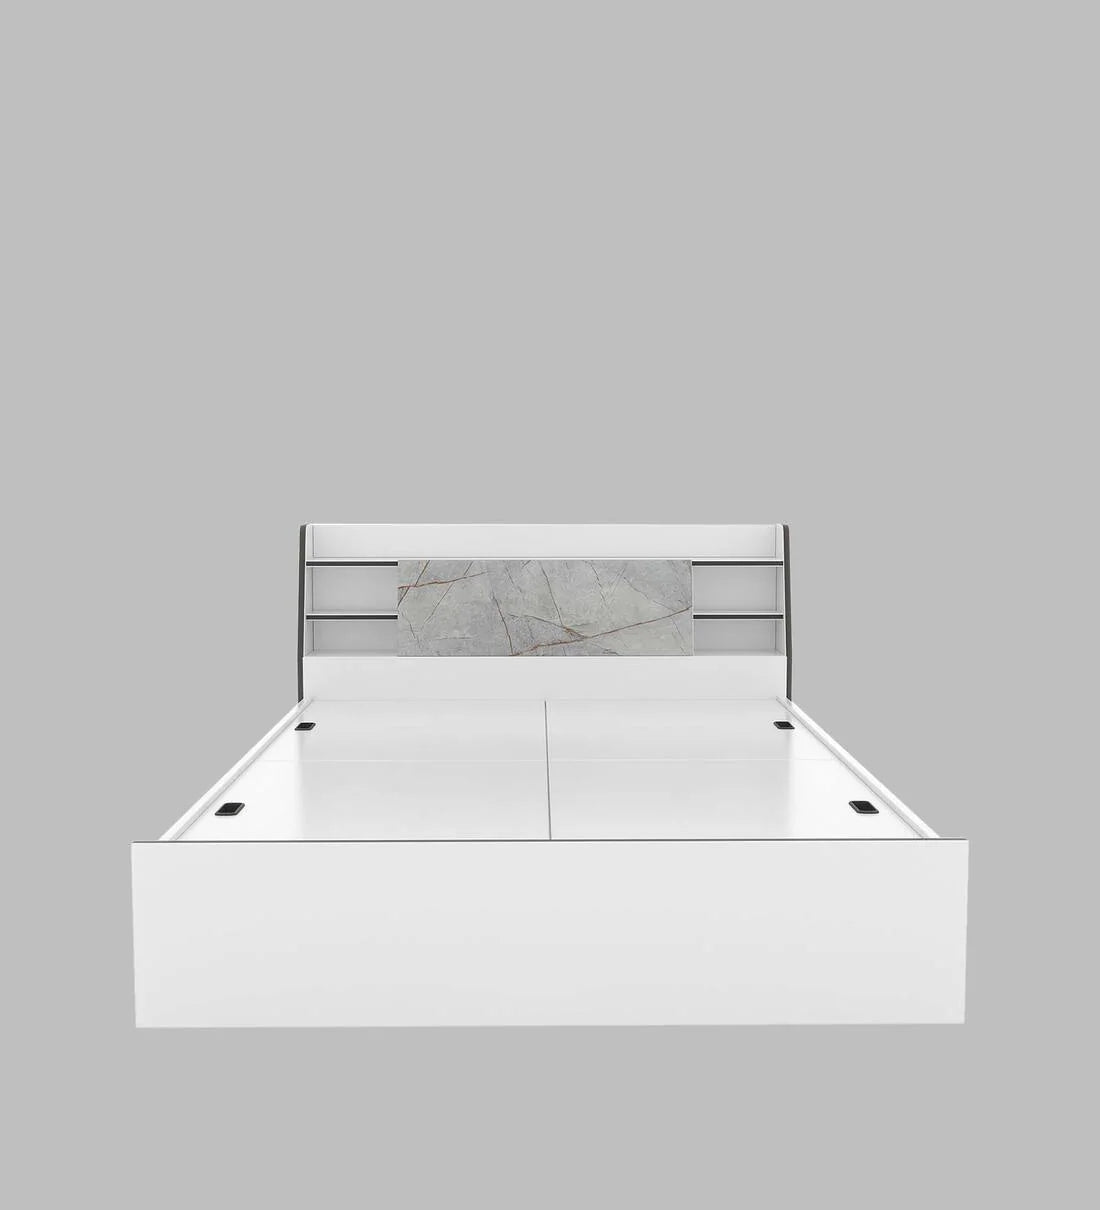 King Size Bed in White Finish with Box Storage